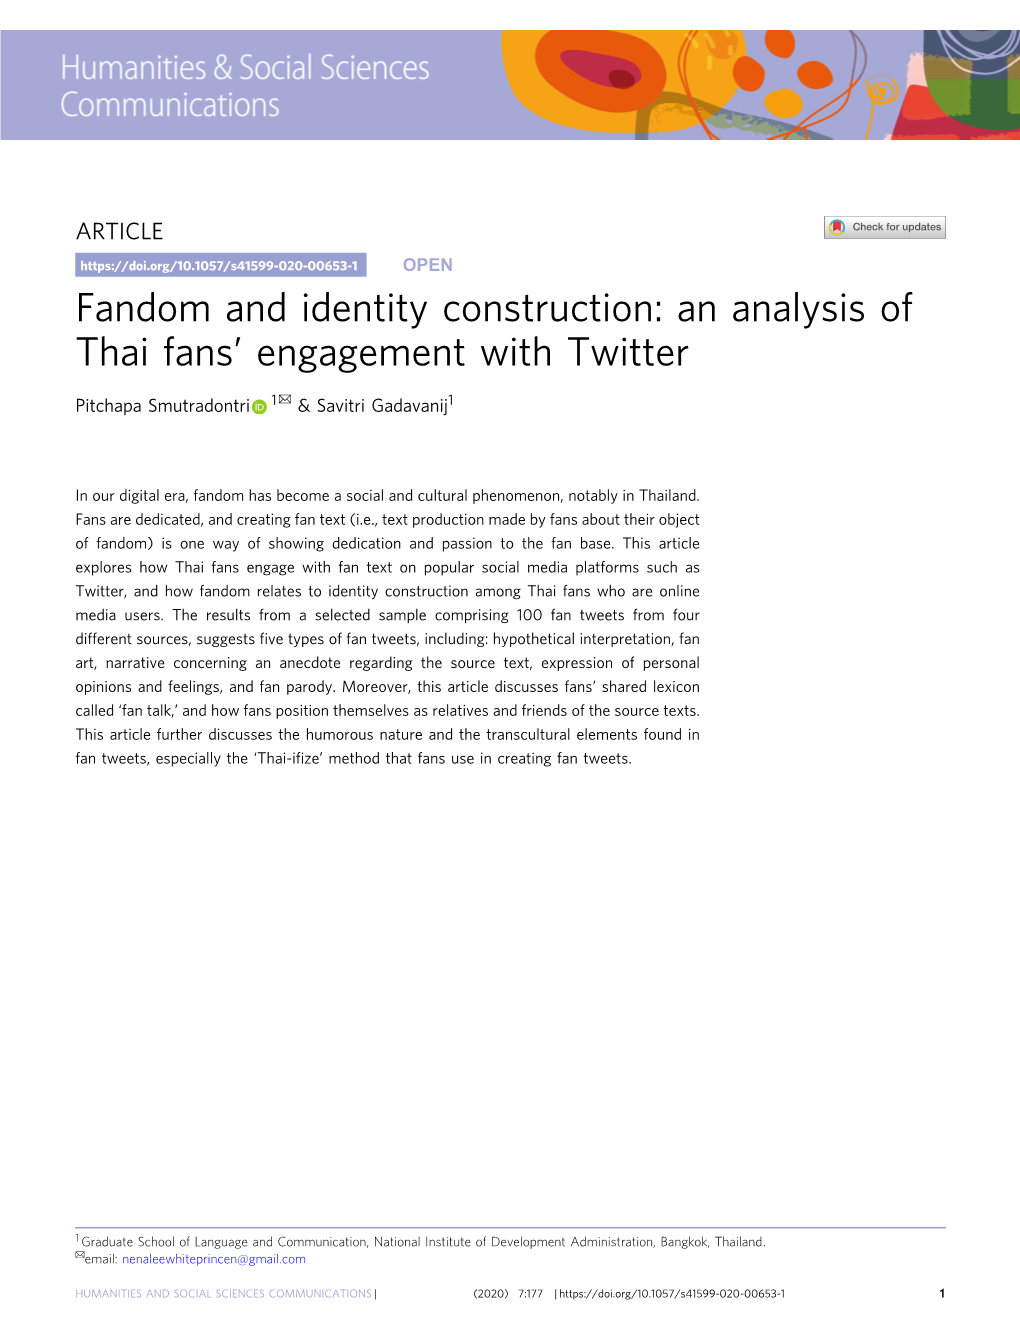 Fandom and Identity Construction: an Analysis of Thai Fans' Engagement with Twitter